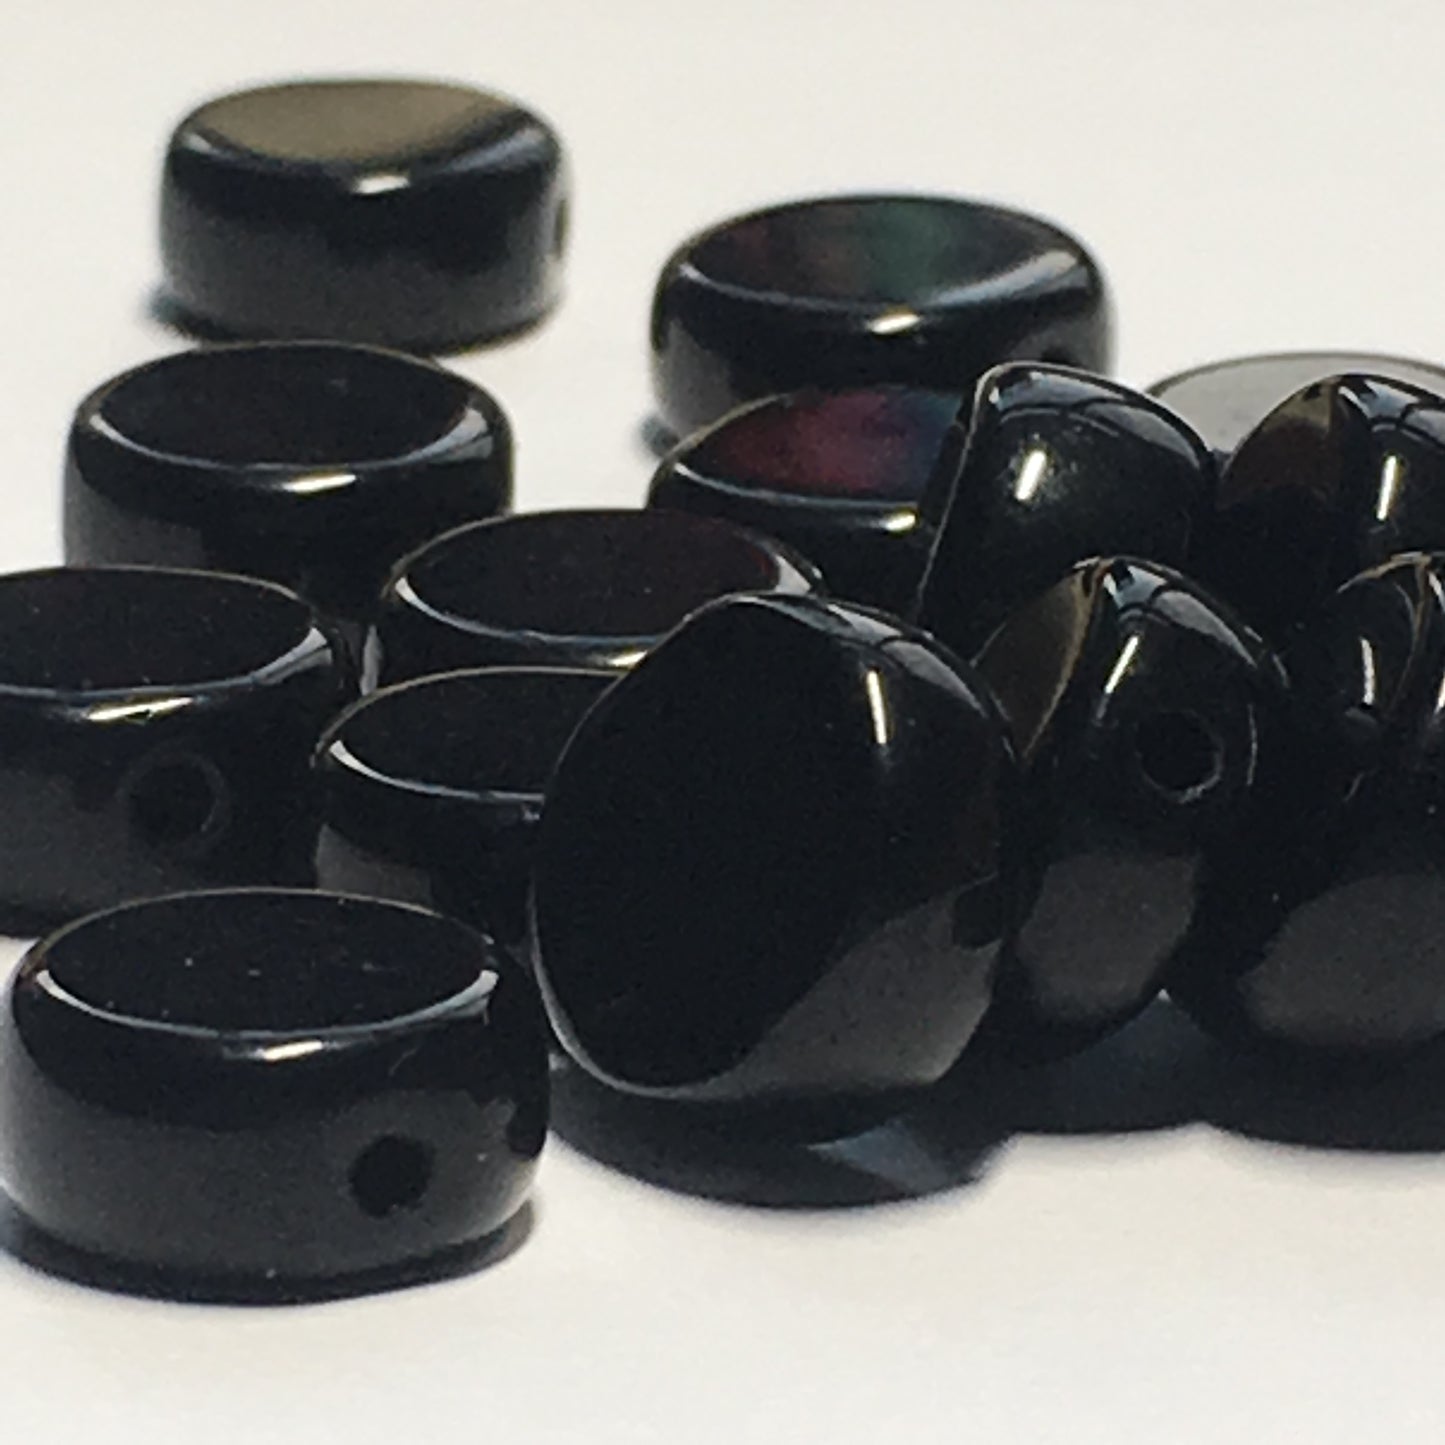 Opaque Black Glass Coin Beads, 10 x 5 mm, 20 Beads